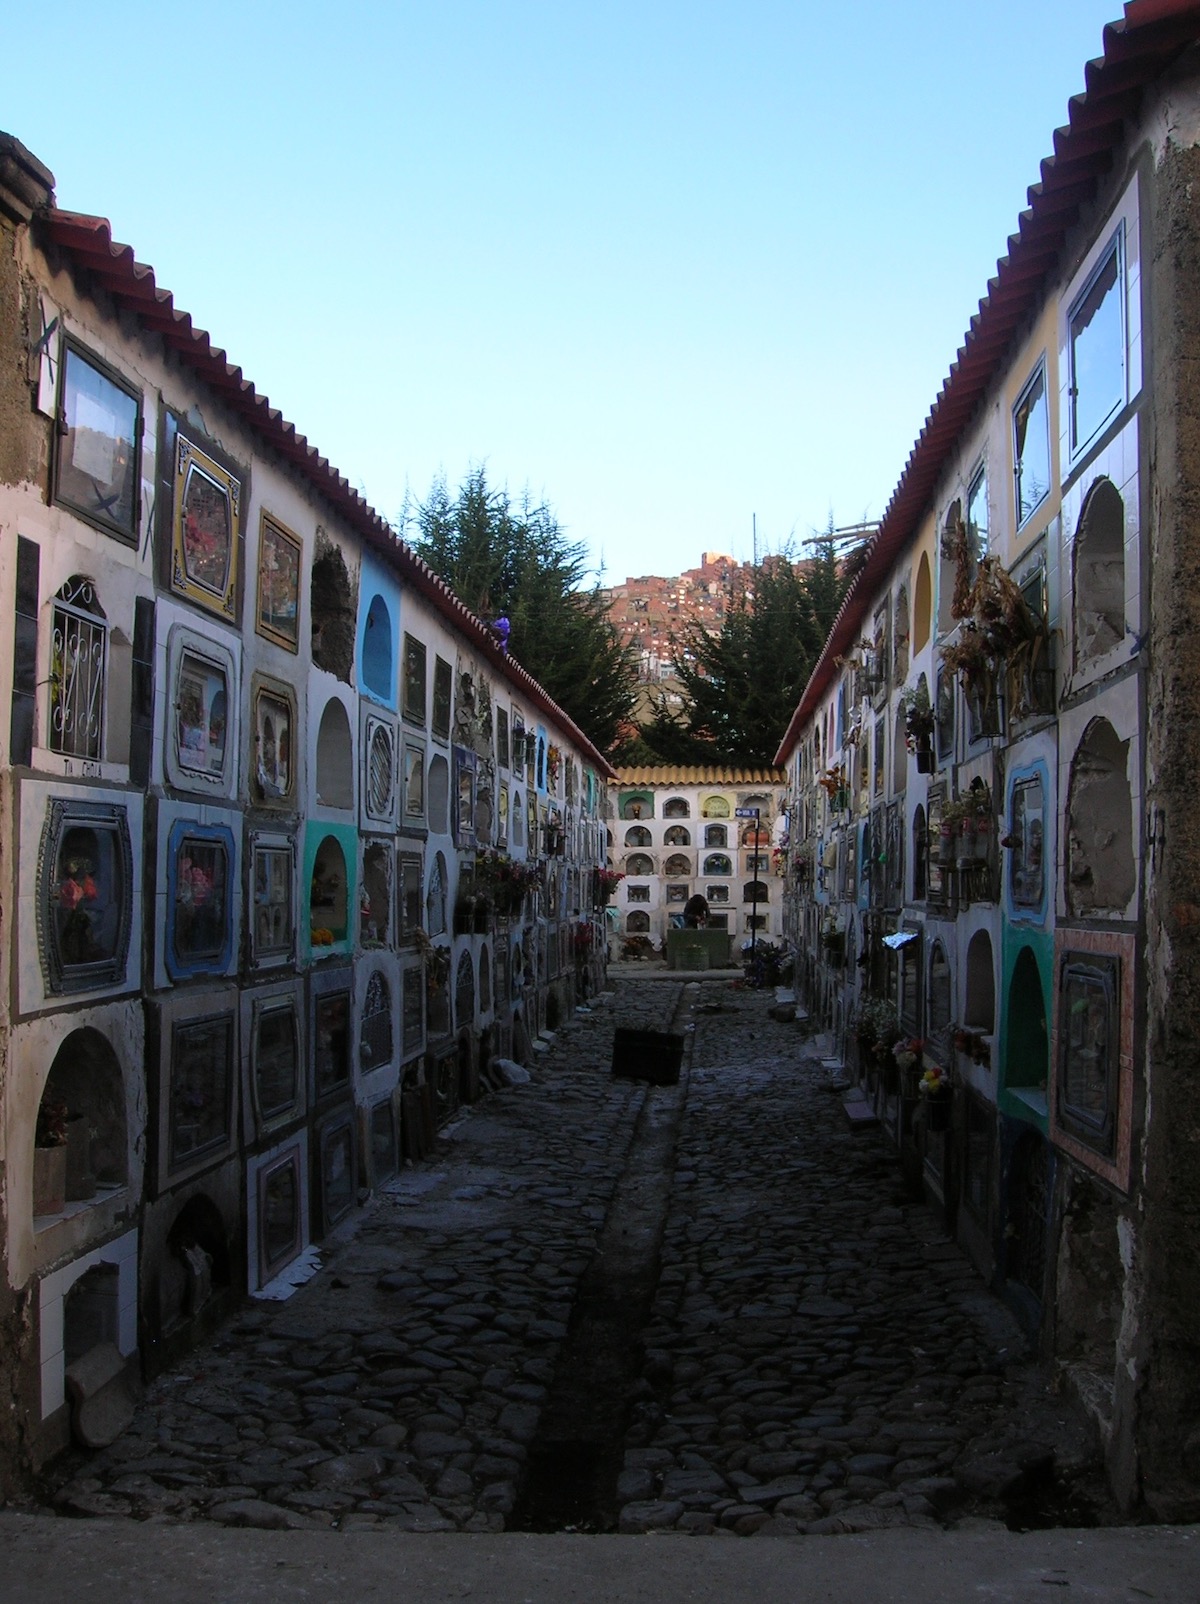 Stacked tombs in an elaborate, decorative cemeterey in La Paz, Bolivia